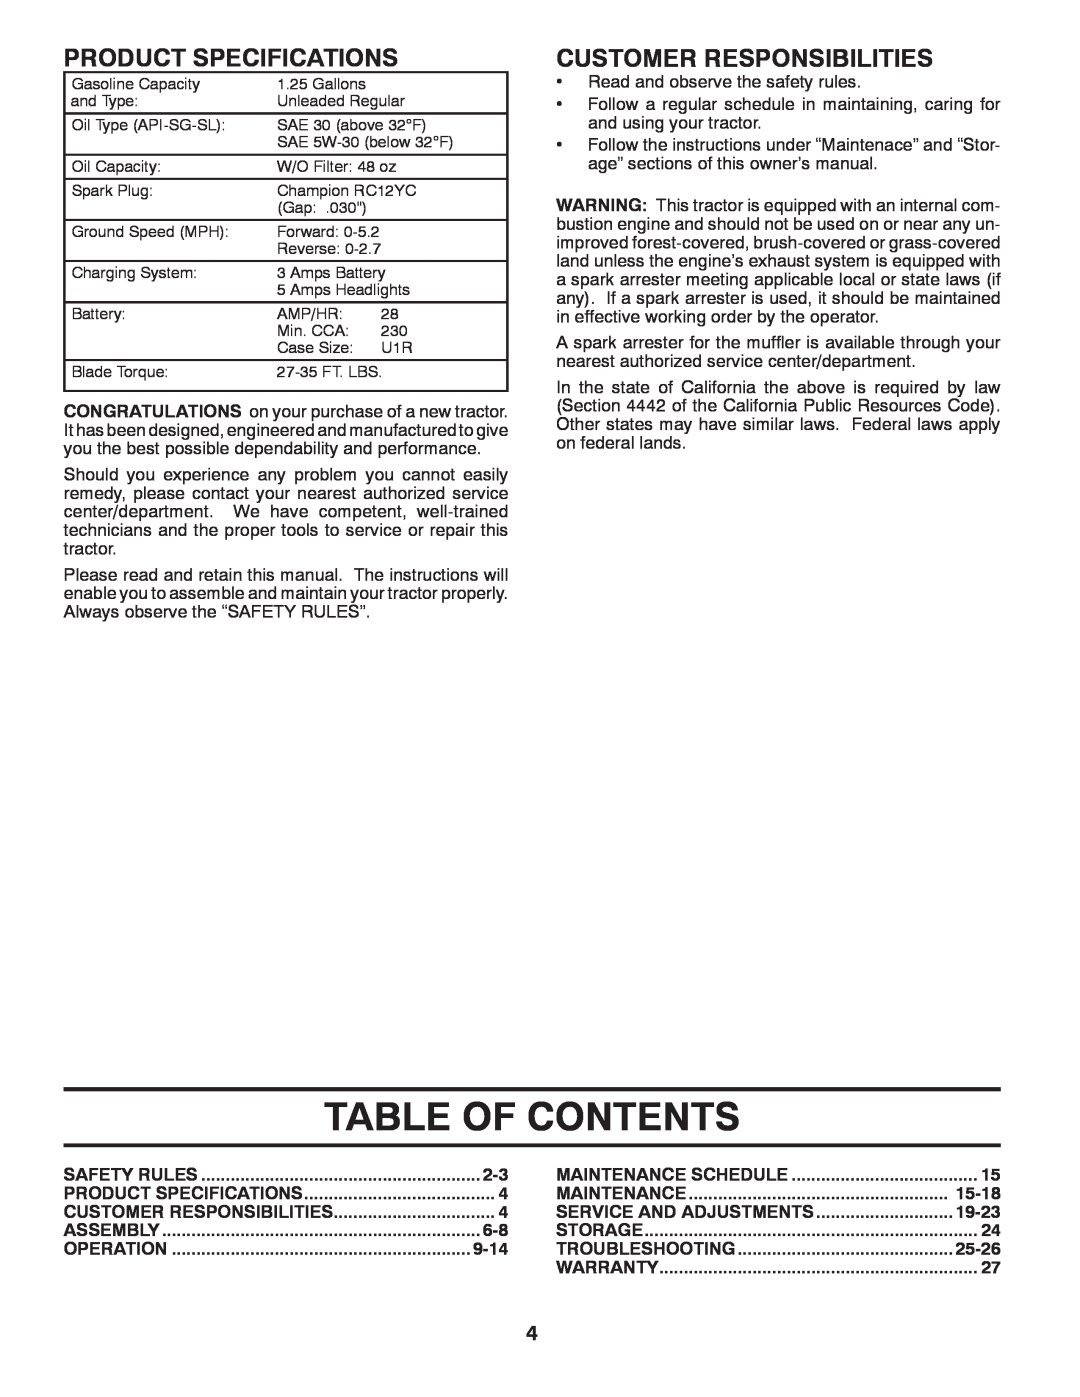 Poulan 419450 manual Table Of Contents, Product Specifications, Customer Responsibilities 